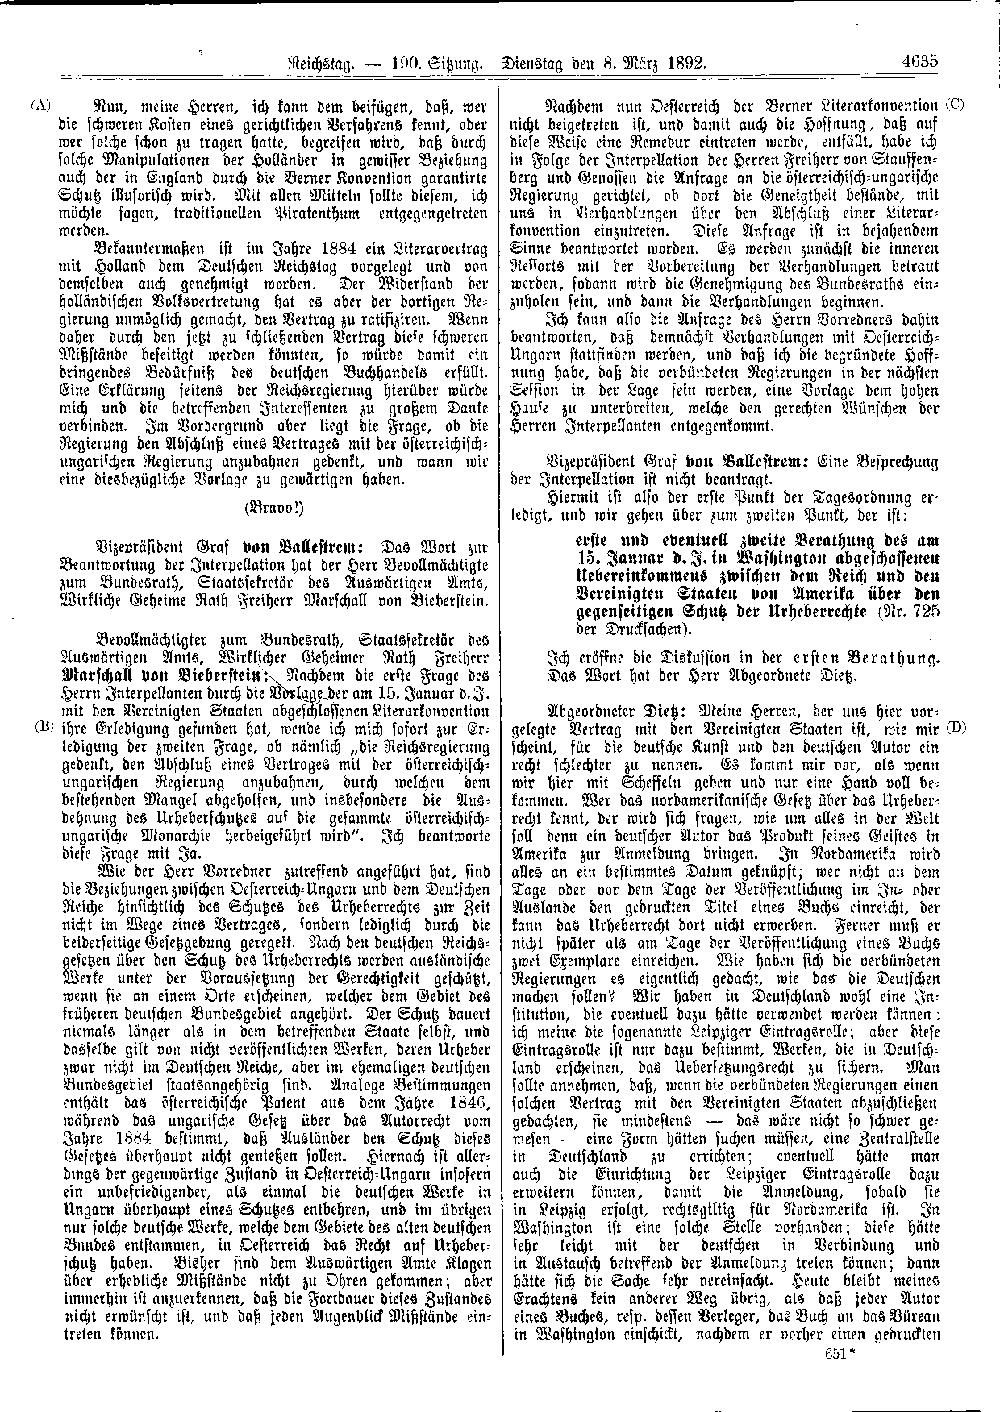 Scan of page 4635